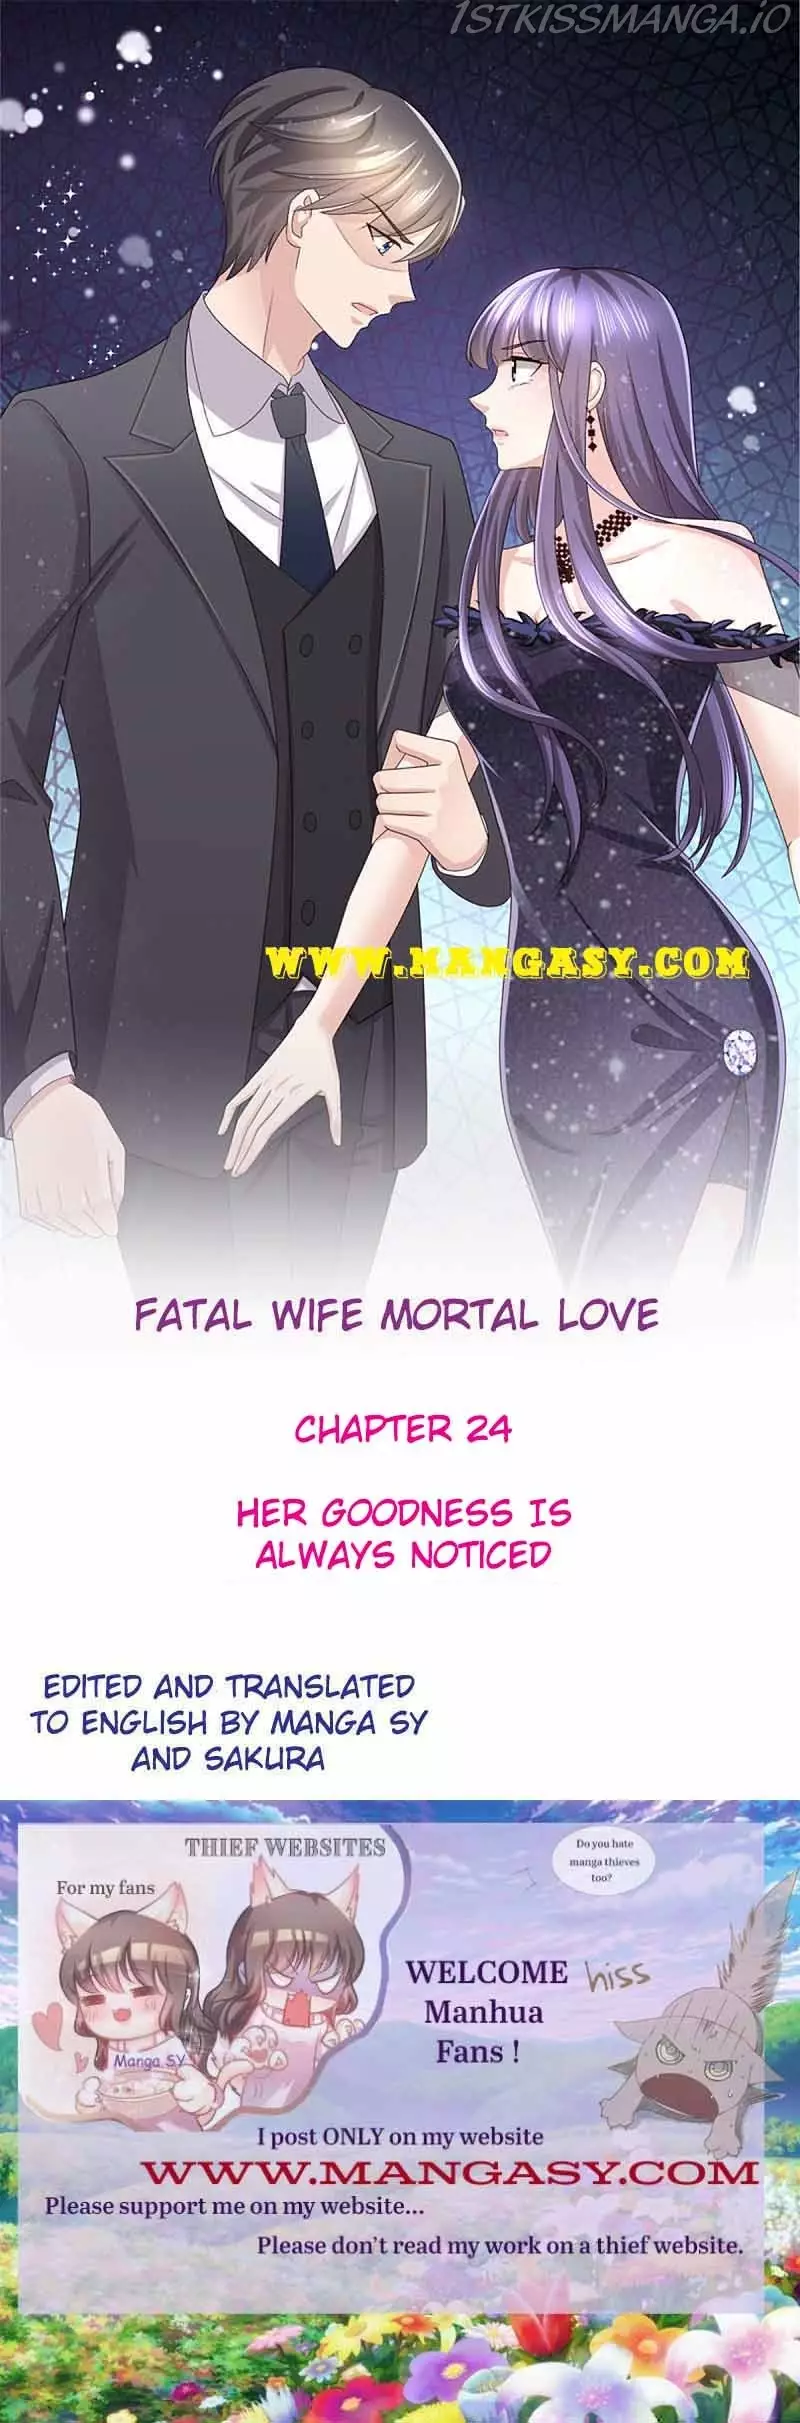 A Deadly Sexy Wife: The Ceo Wants To Remarry - 25.2 page 1-6346414a